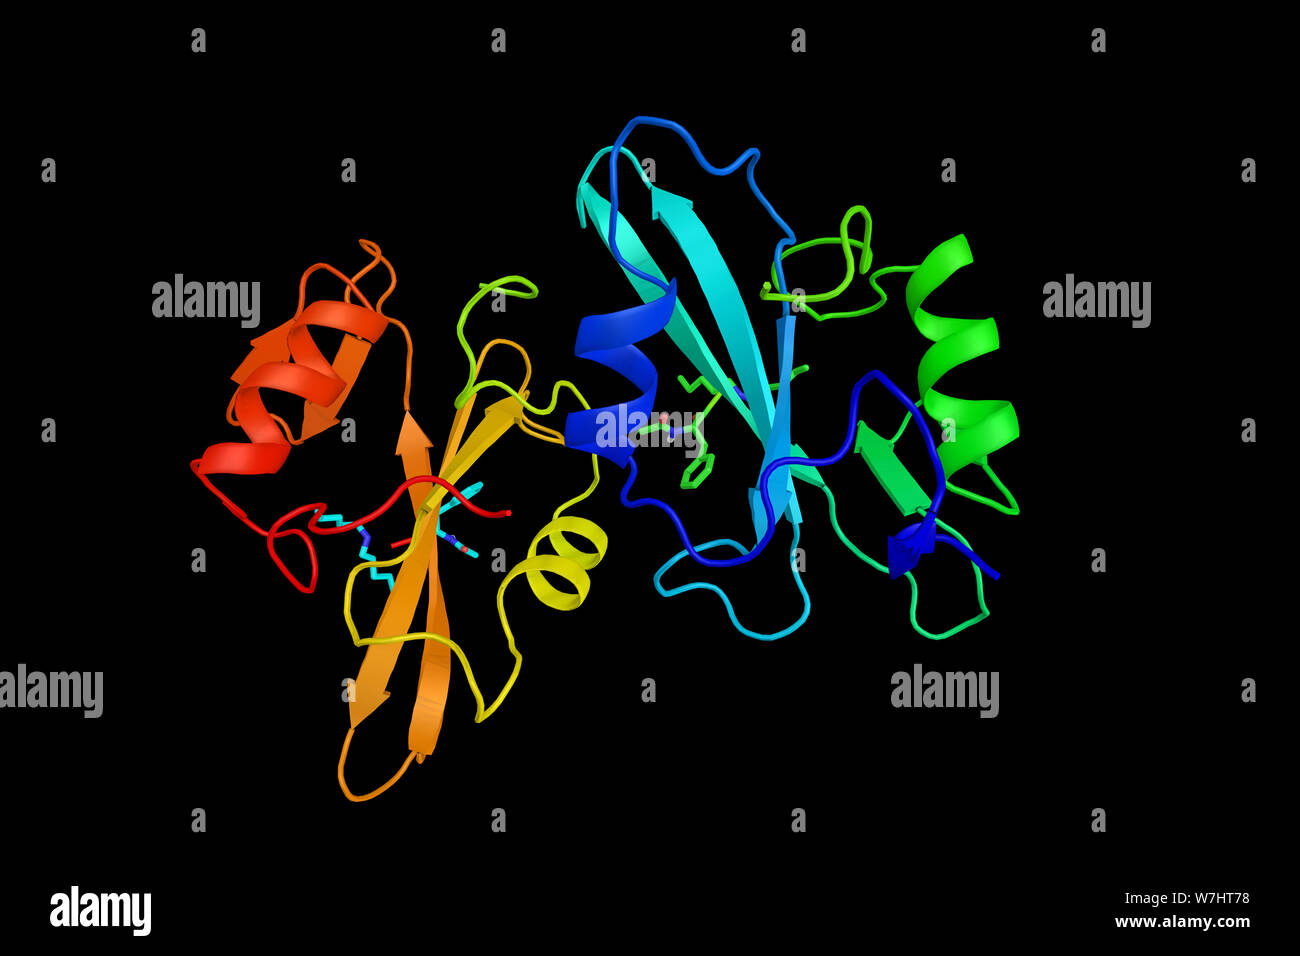 Proto-oncogene tyrosine-protein kinase Src, a non-receptor tyrosine kinase protein which phosphorylates specific tyrosine residues in other proteins. Stock Photo